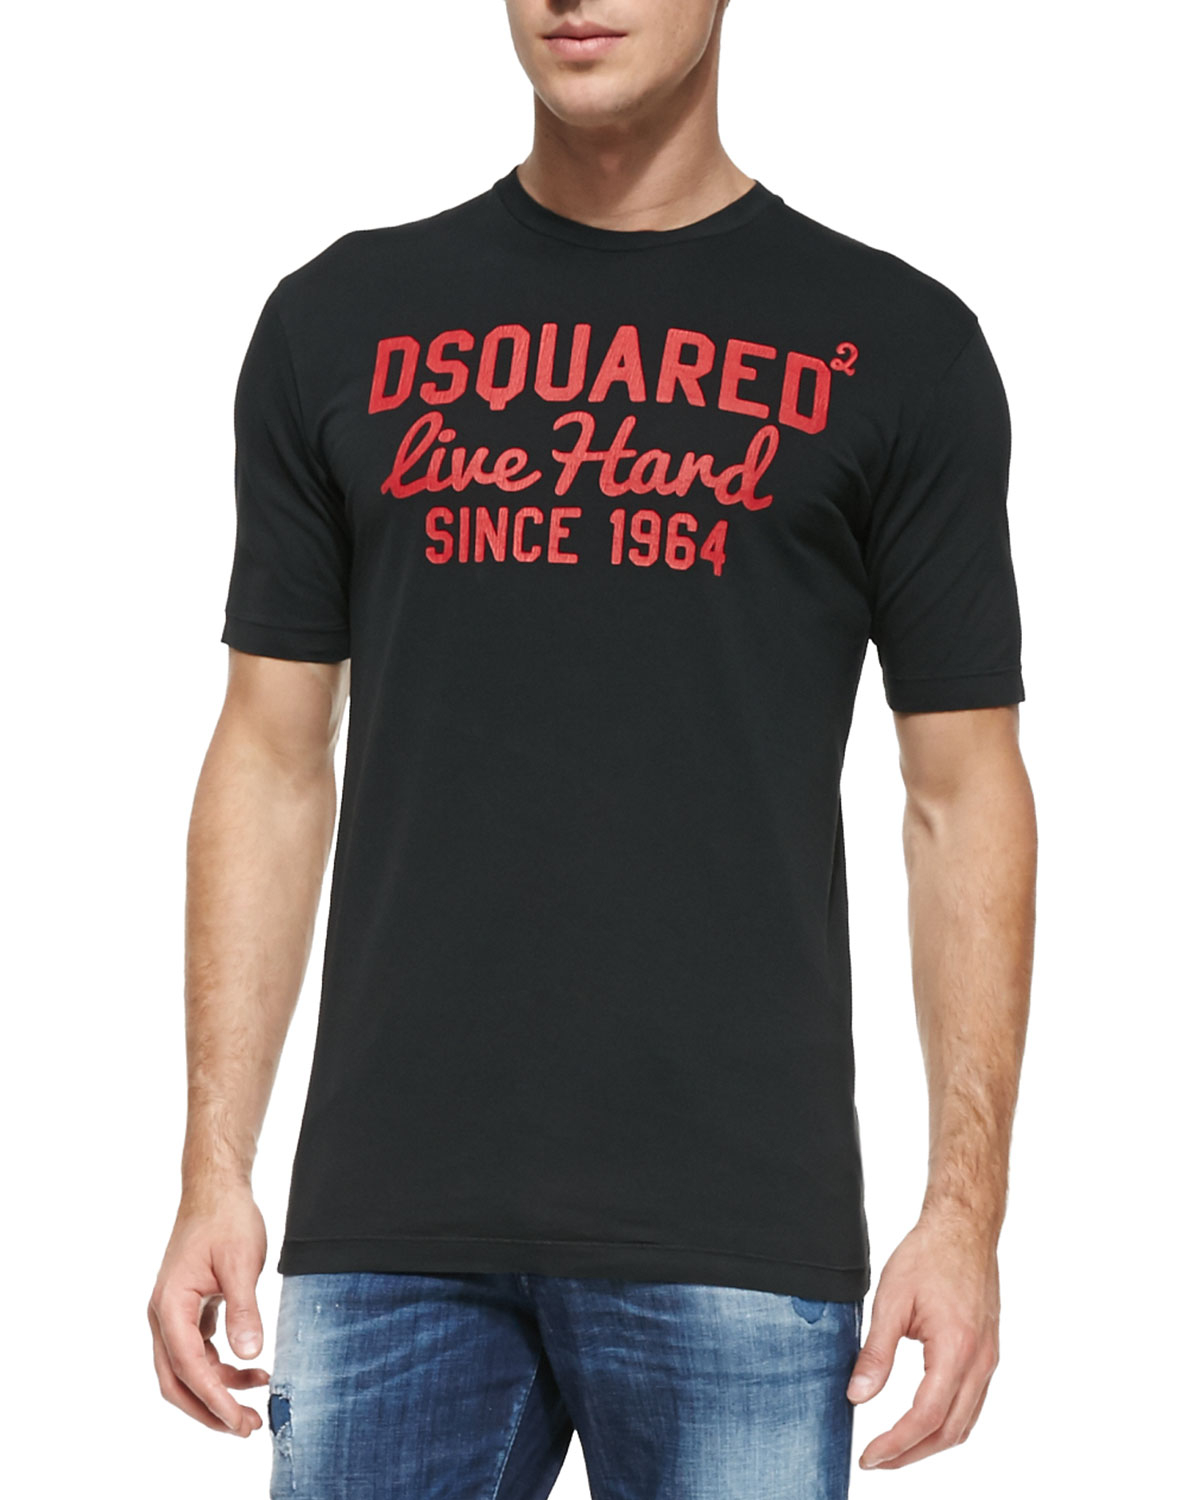 dsquared t shirt black and red